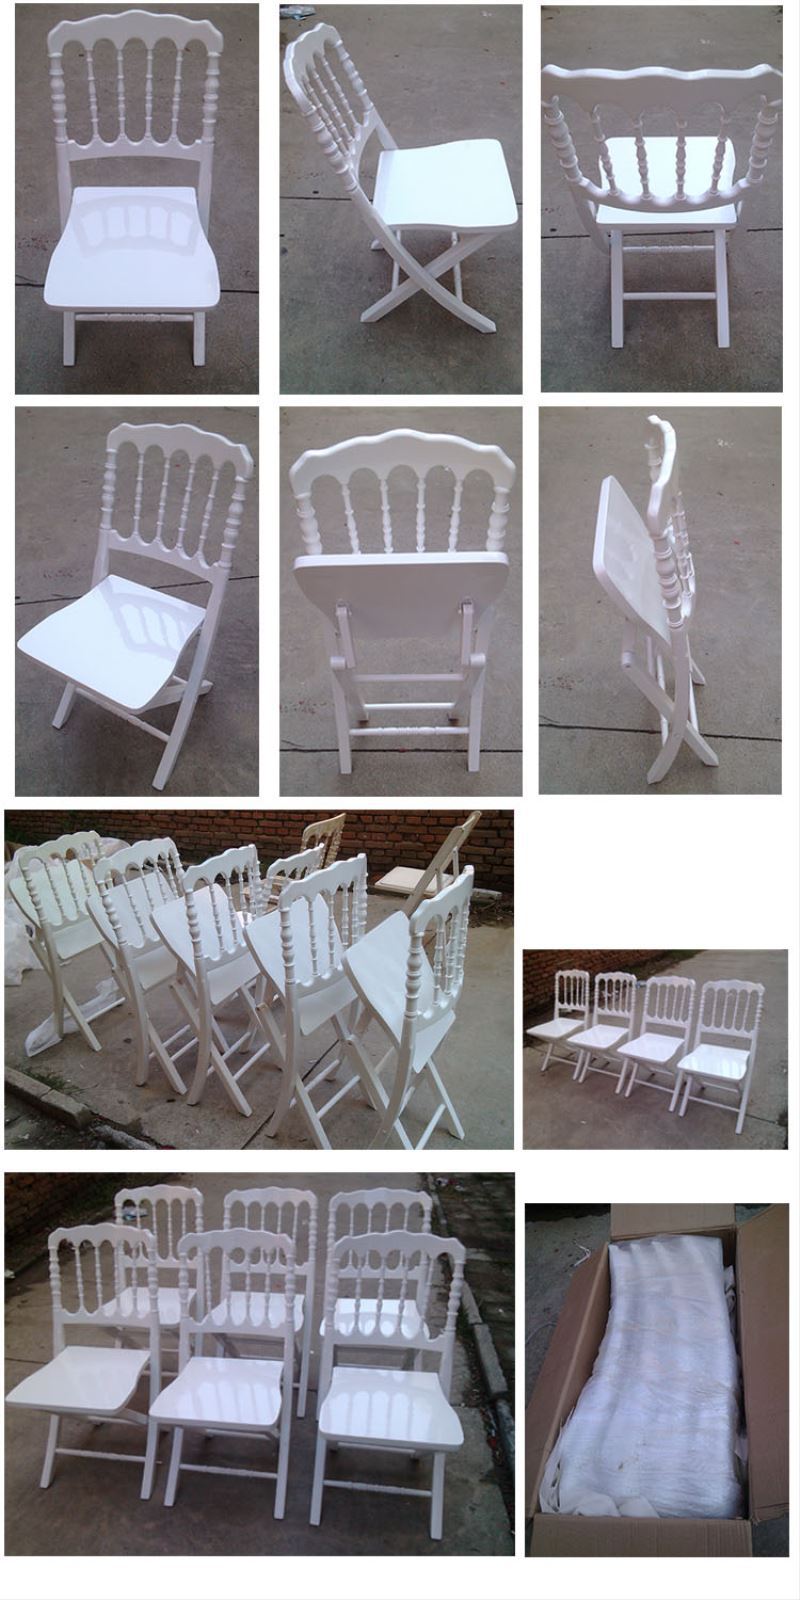 Hot Popular Style rental bamboo folding chair for various venues